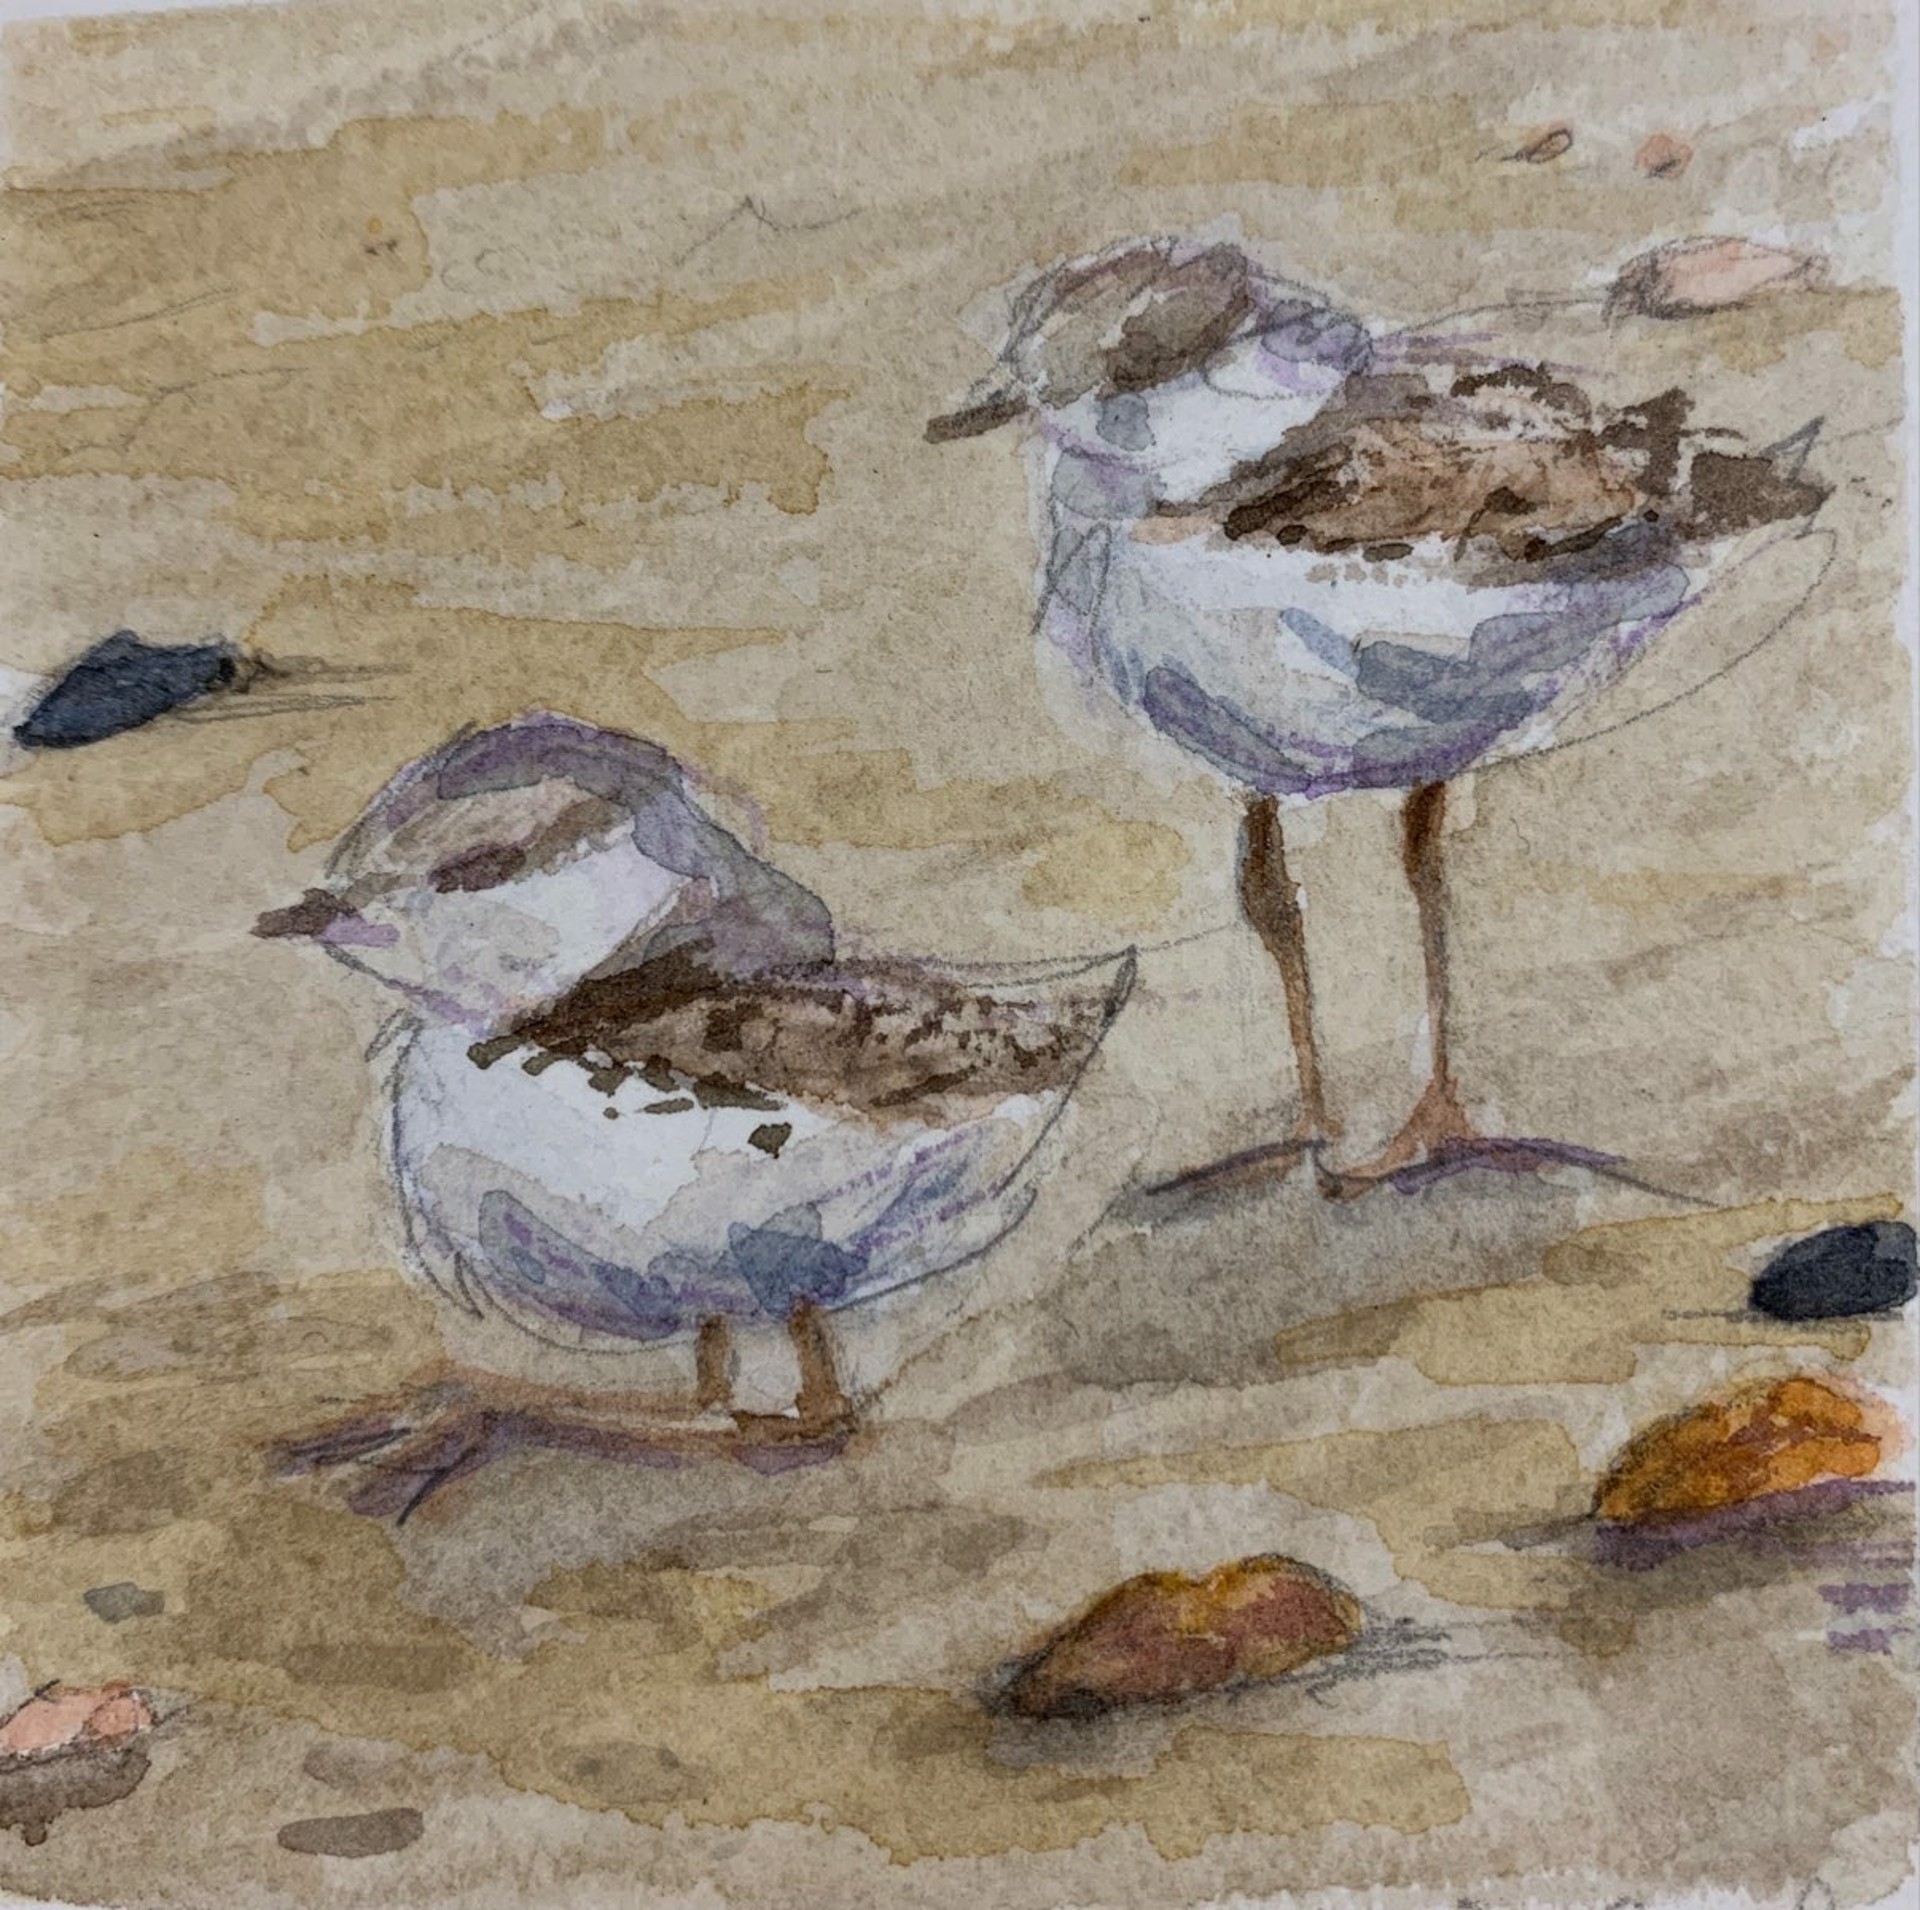 Plover Pair by Allison Charles